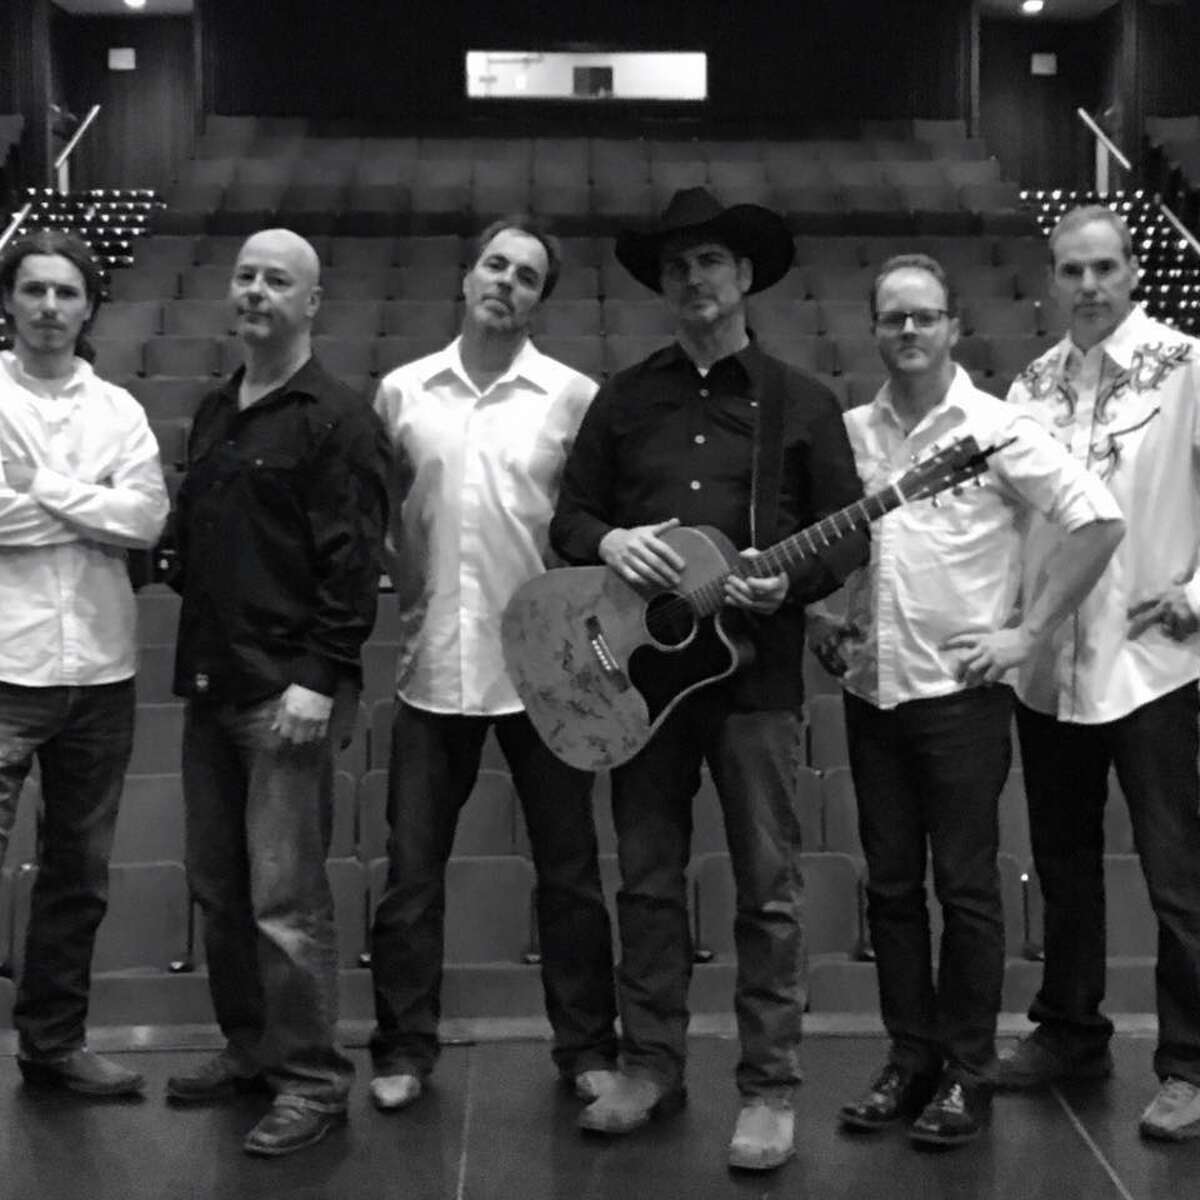 The Glendale Riders will headline the Alton-Godfrey Rotary Club's 10th Annual Benefit Concert on at 7 p.m. Saturday, Nov. 19 at the Ann Whitney Olin Theater in the Hatheway Cultural Center at Lewis and Clark Community College in Godfrey.